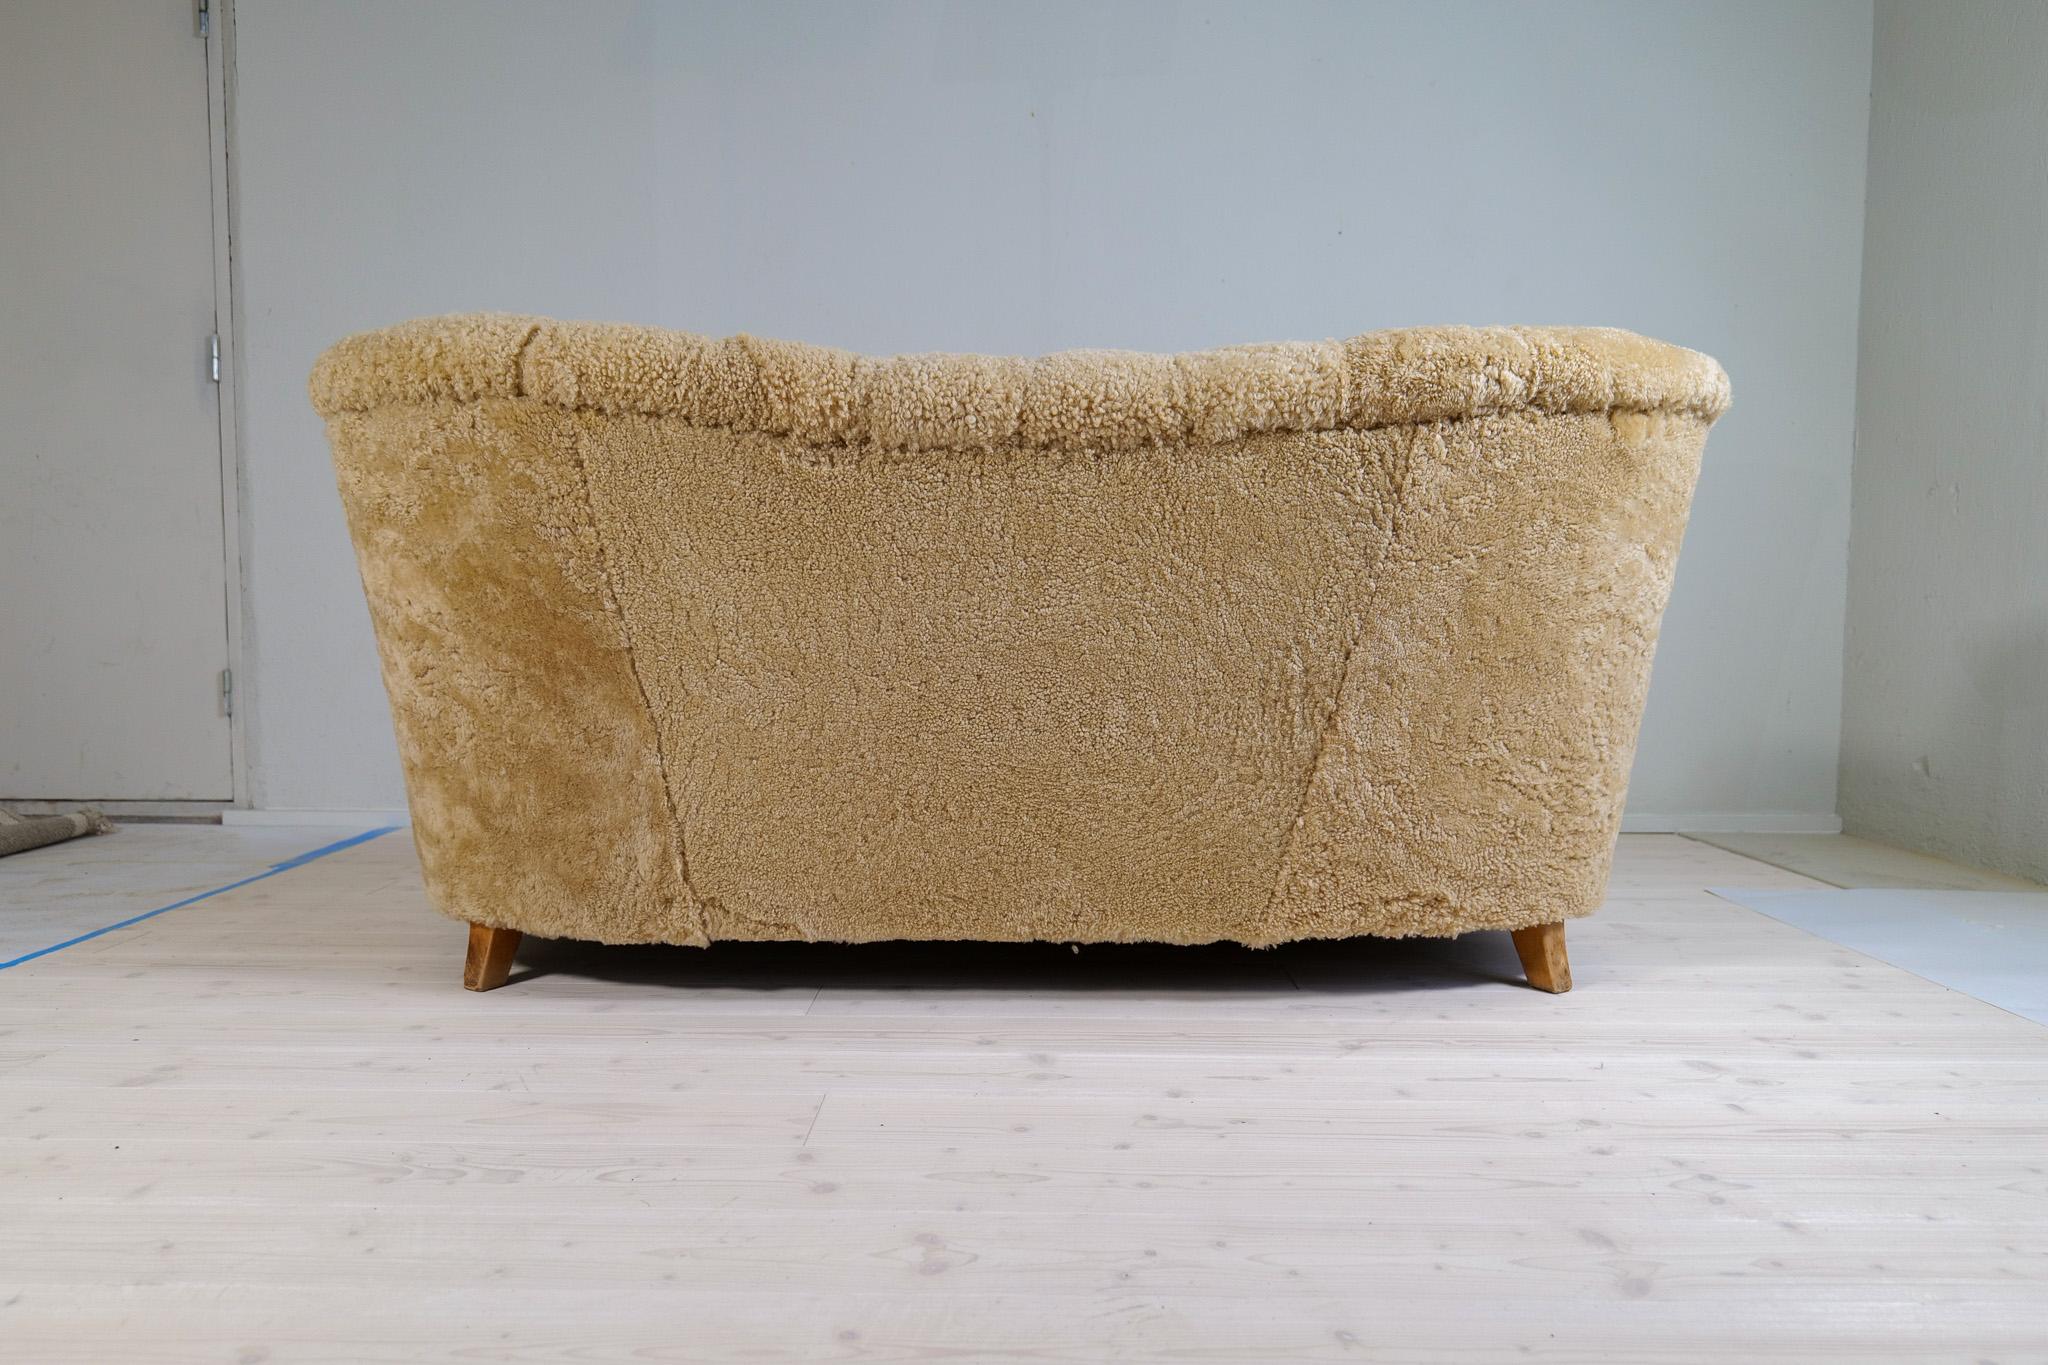 Midcentury Sculptrual Sheepskin/Shearling Sofa in Manors of Marta Blomstedt 10